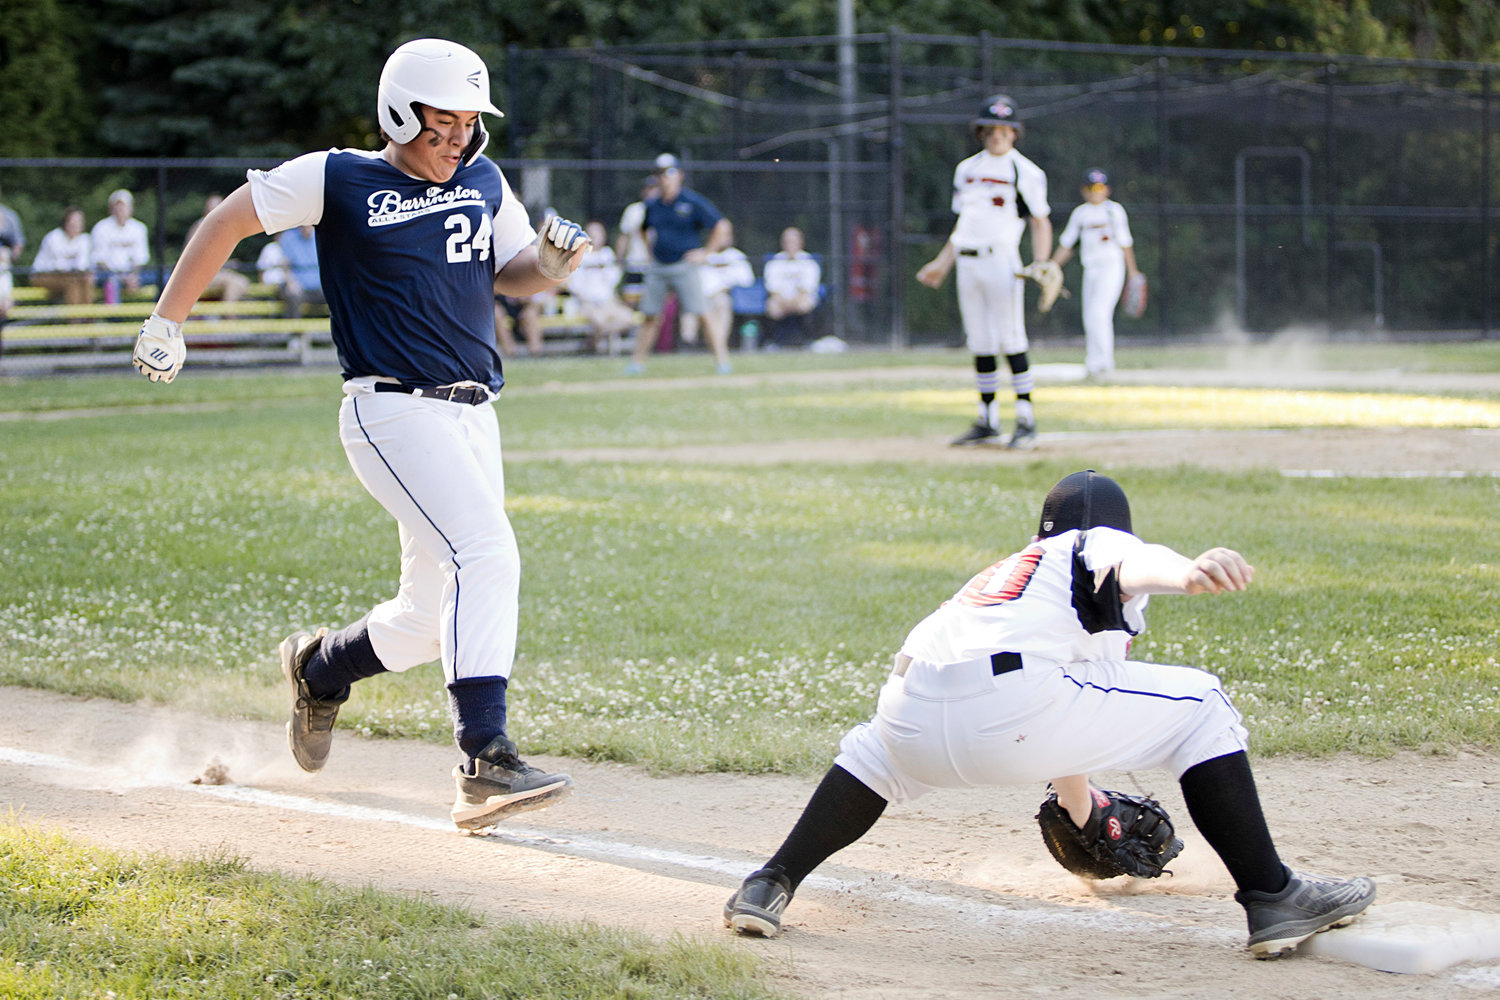 Barrington's Ellis Brittelle sprints toward first base during a District 2 All Star game on Saturday.